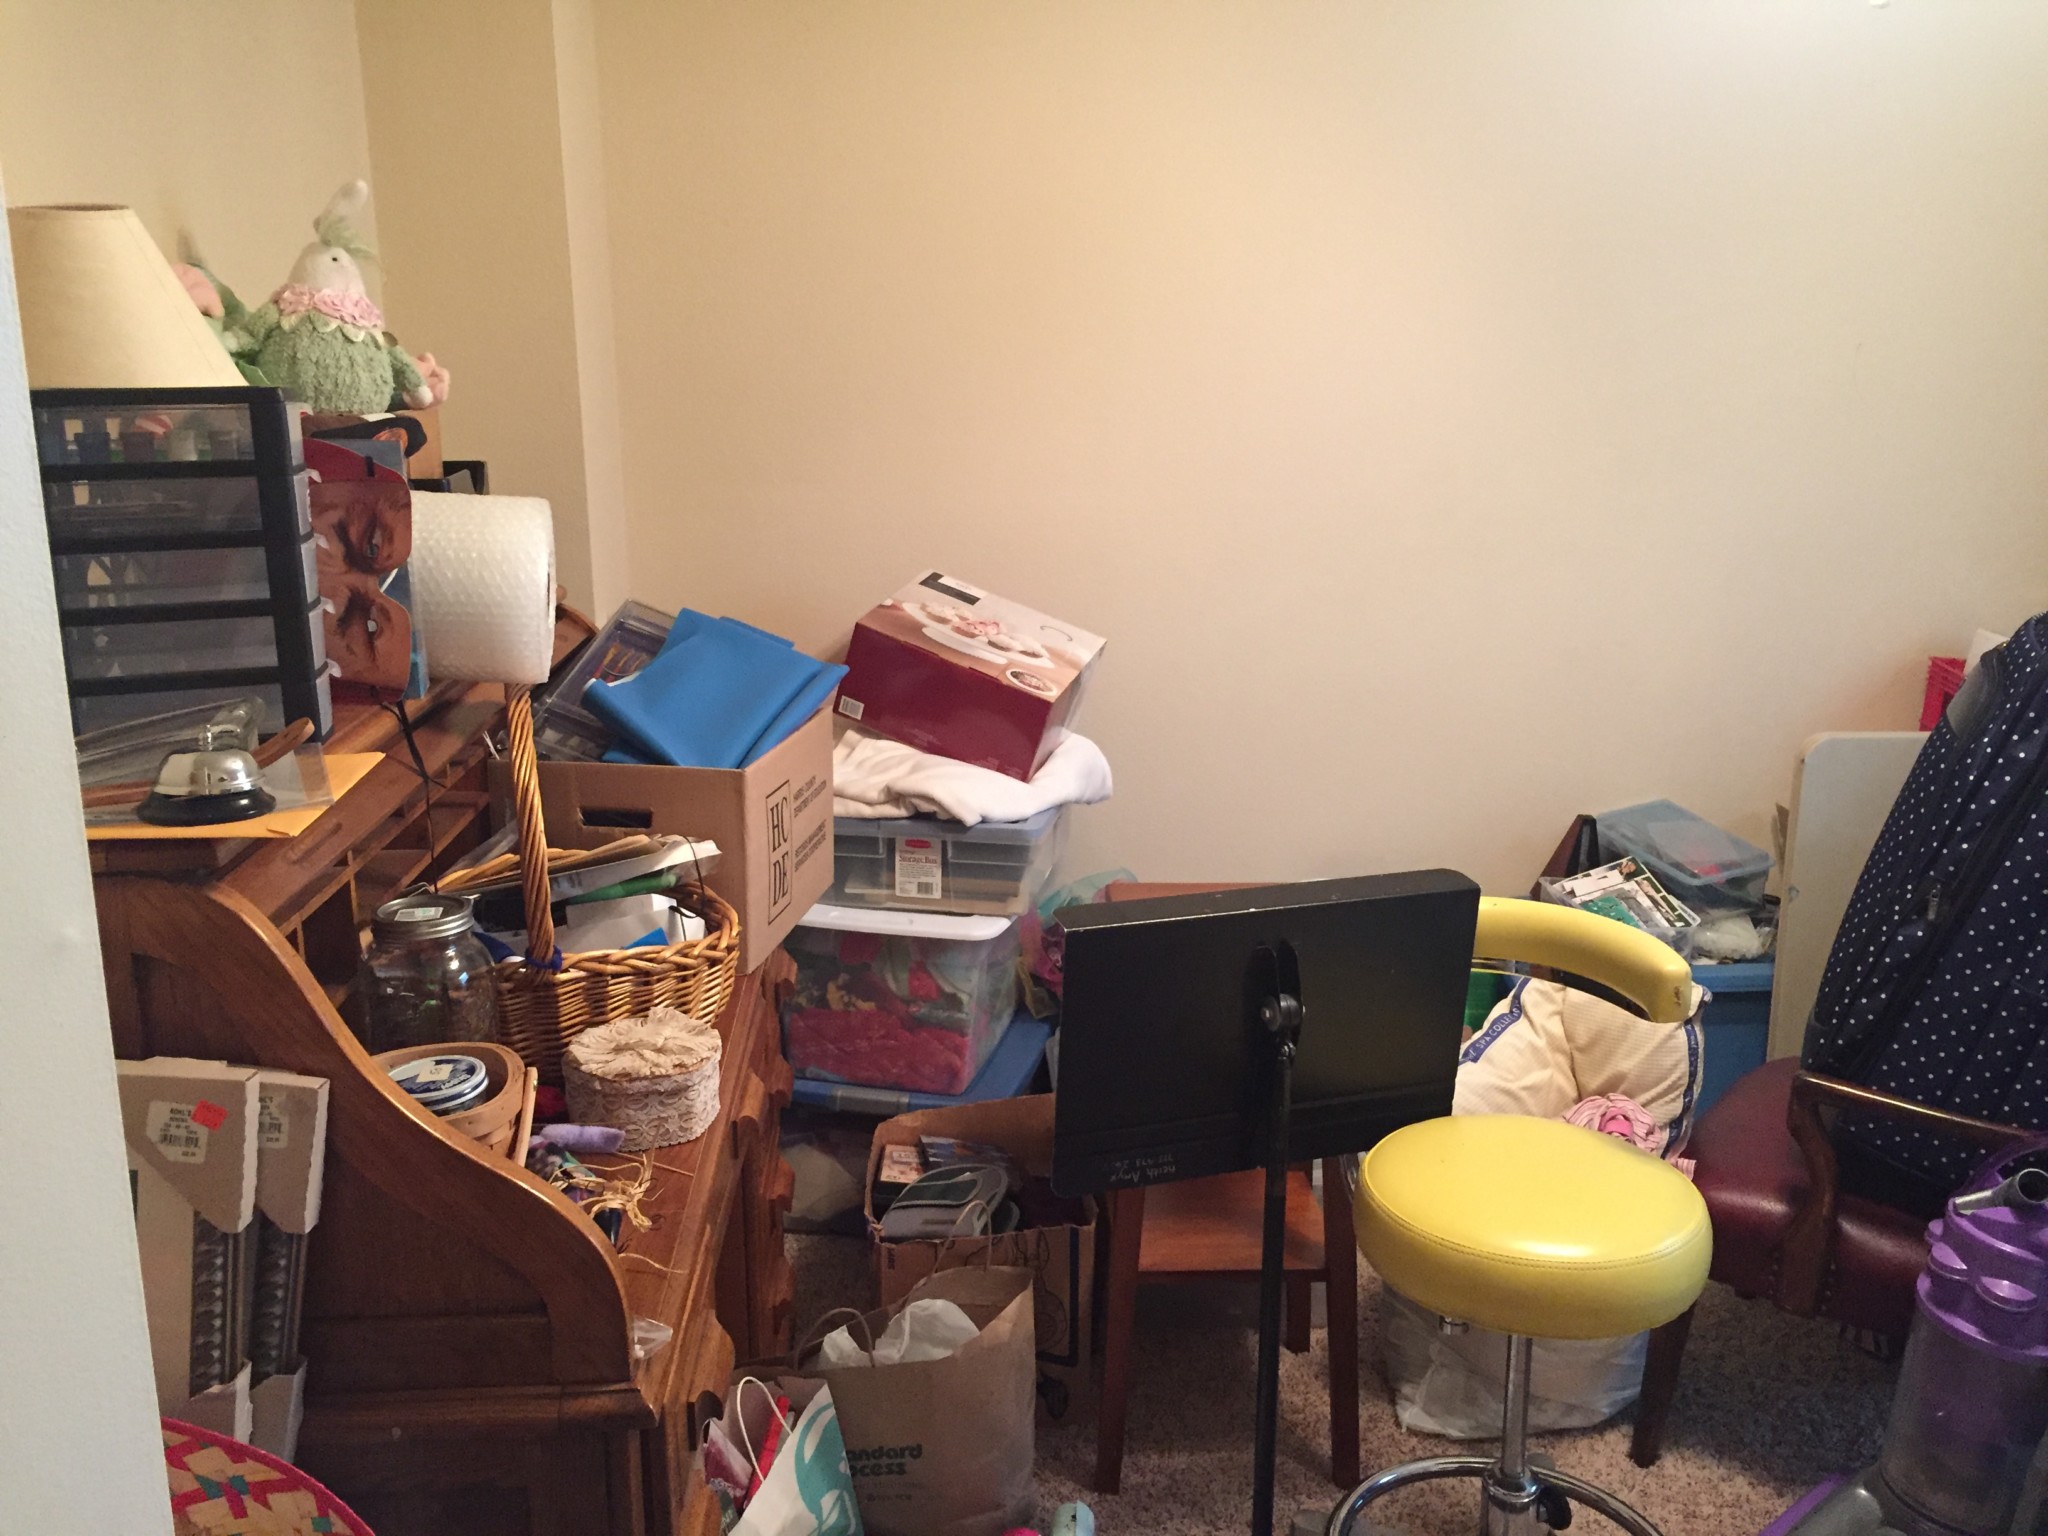 Does Home Organizing Affect Your Life?